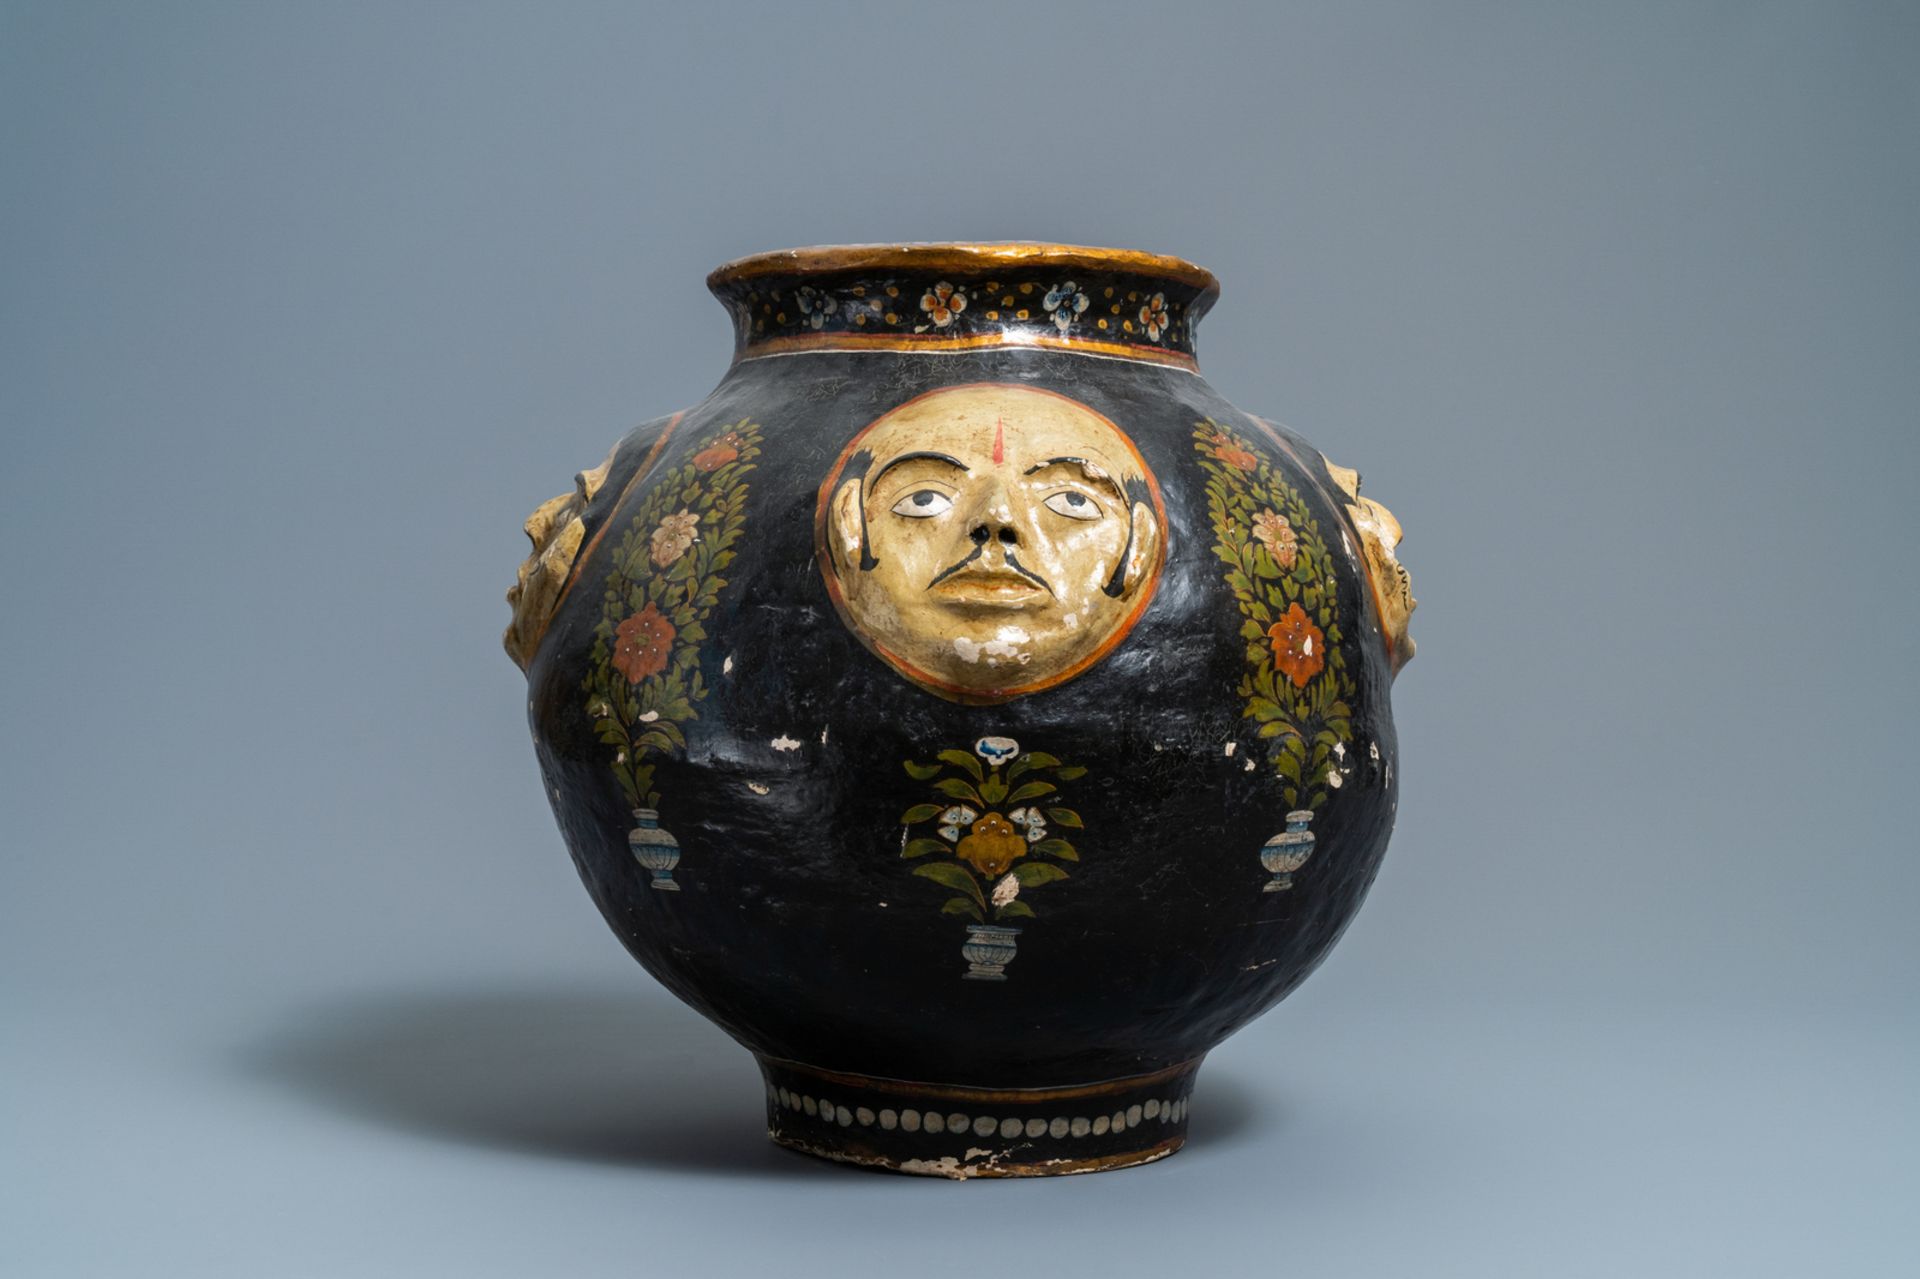 A relief-decorated papier-mache vase with four faces, Kashmir, India, 19th C. - Image 3 of 8